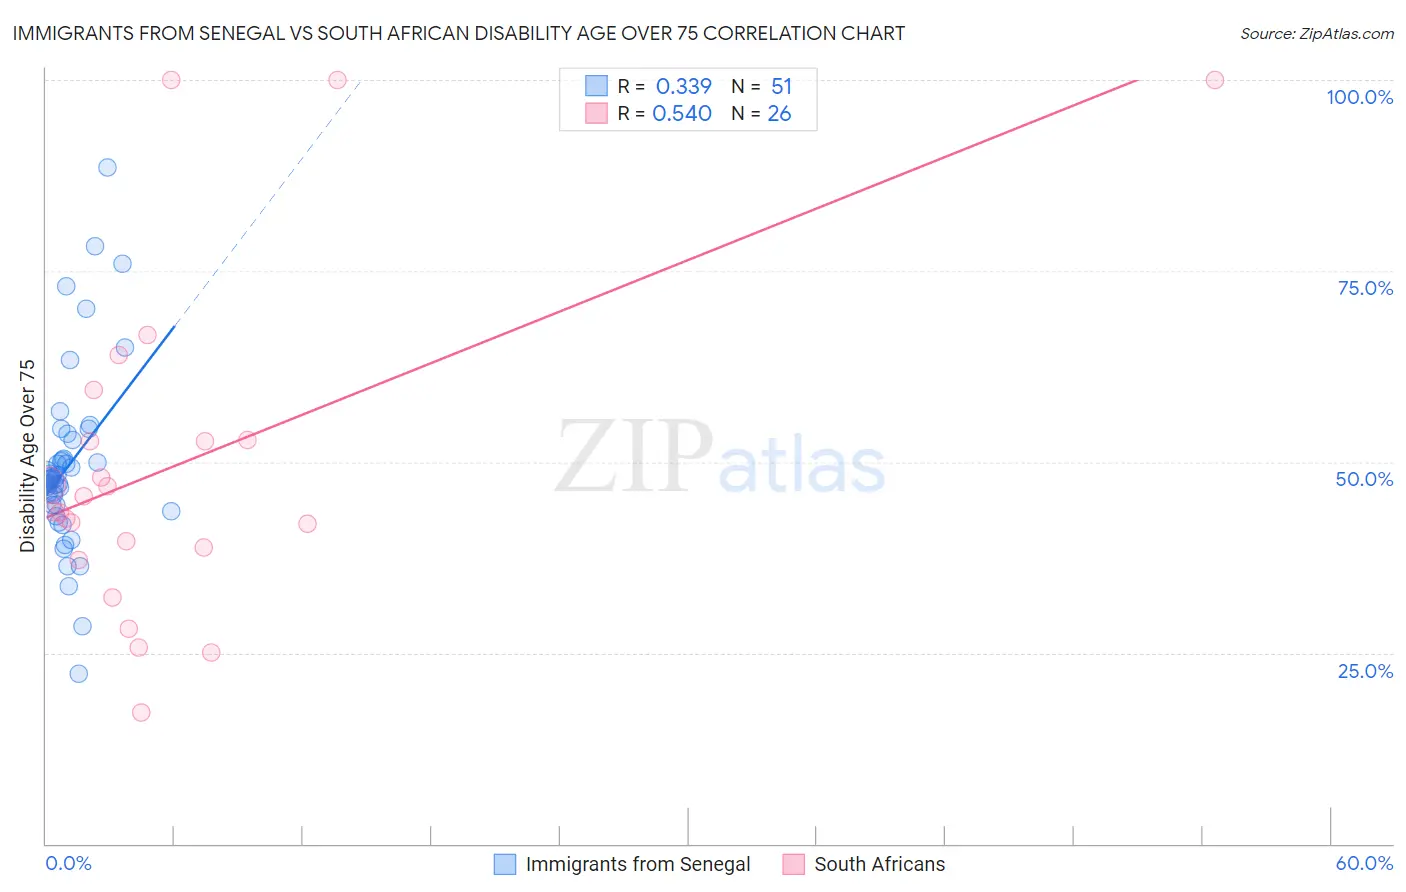 Immigrants from Senegal vs South African Disability Age Over 75